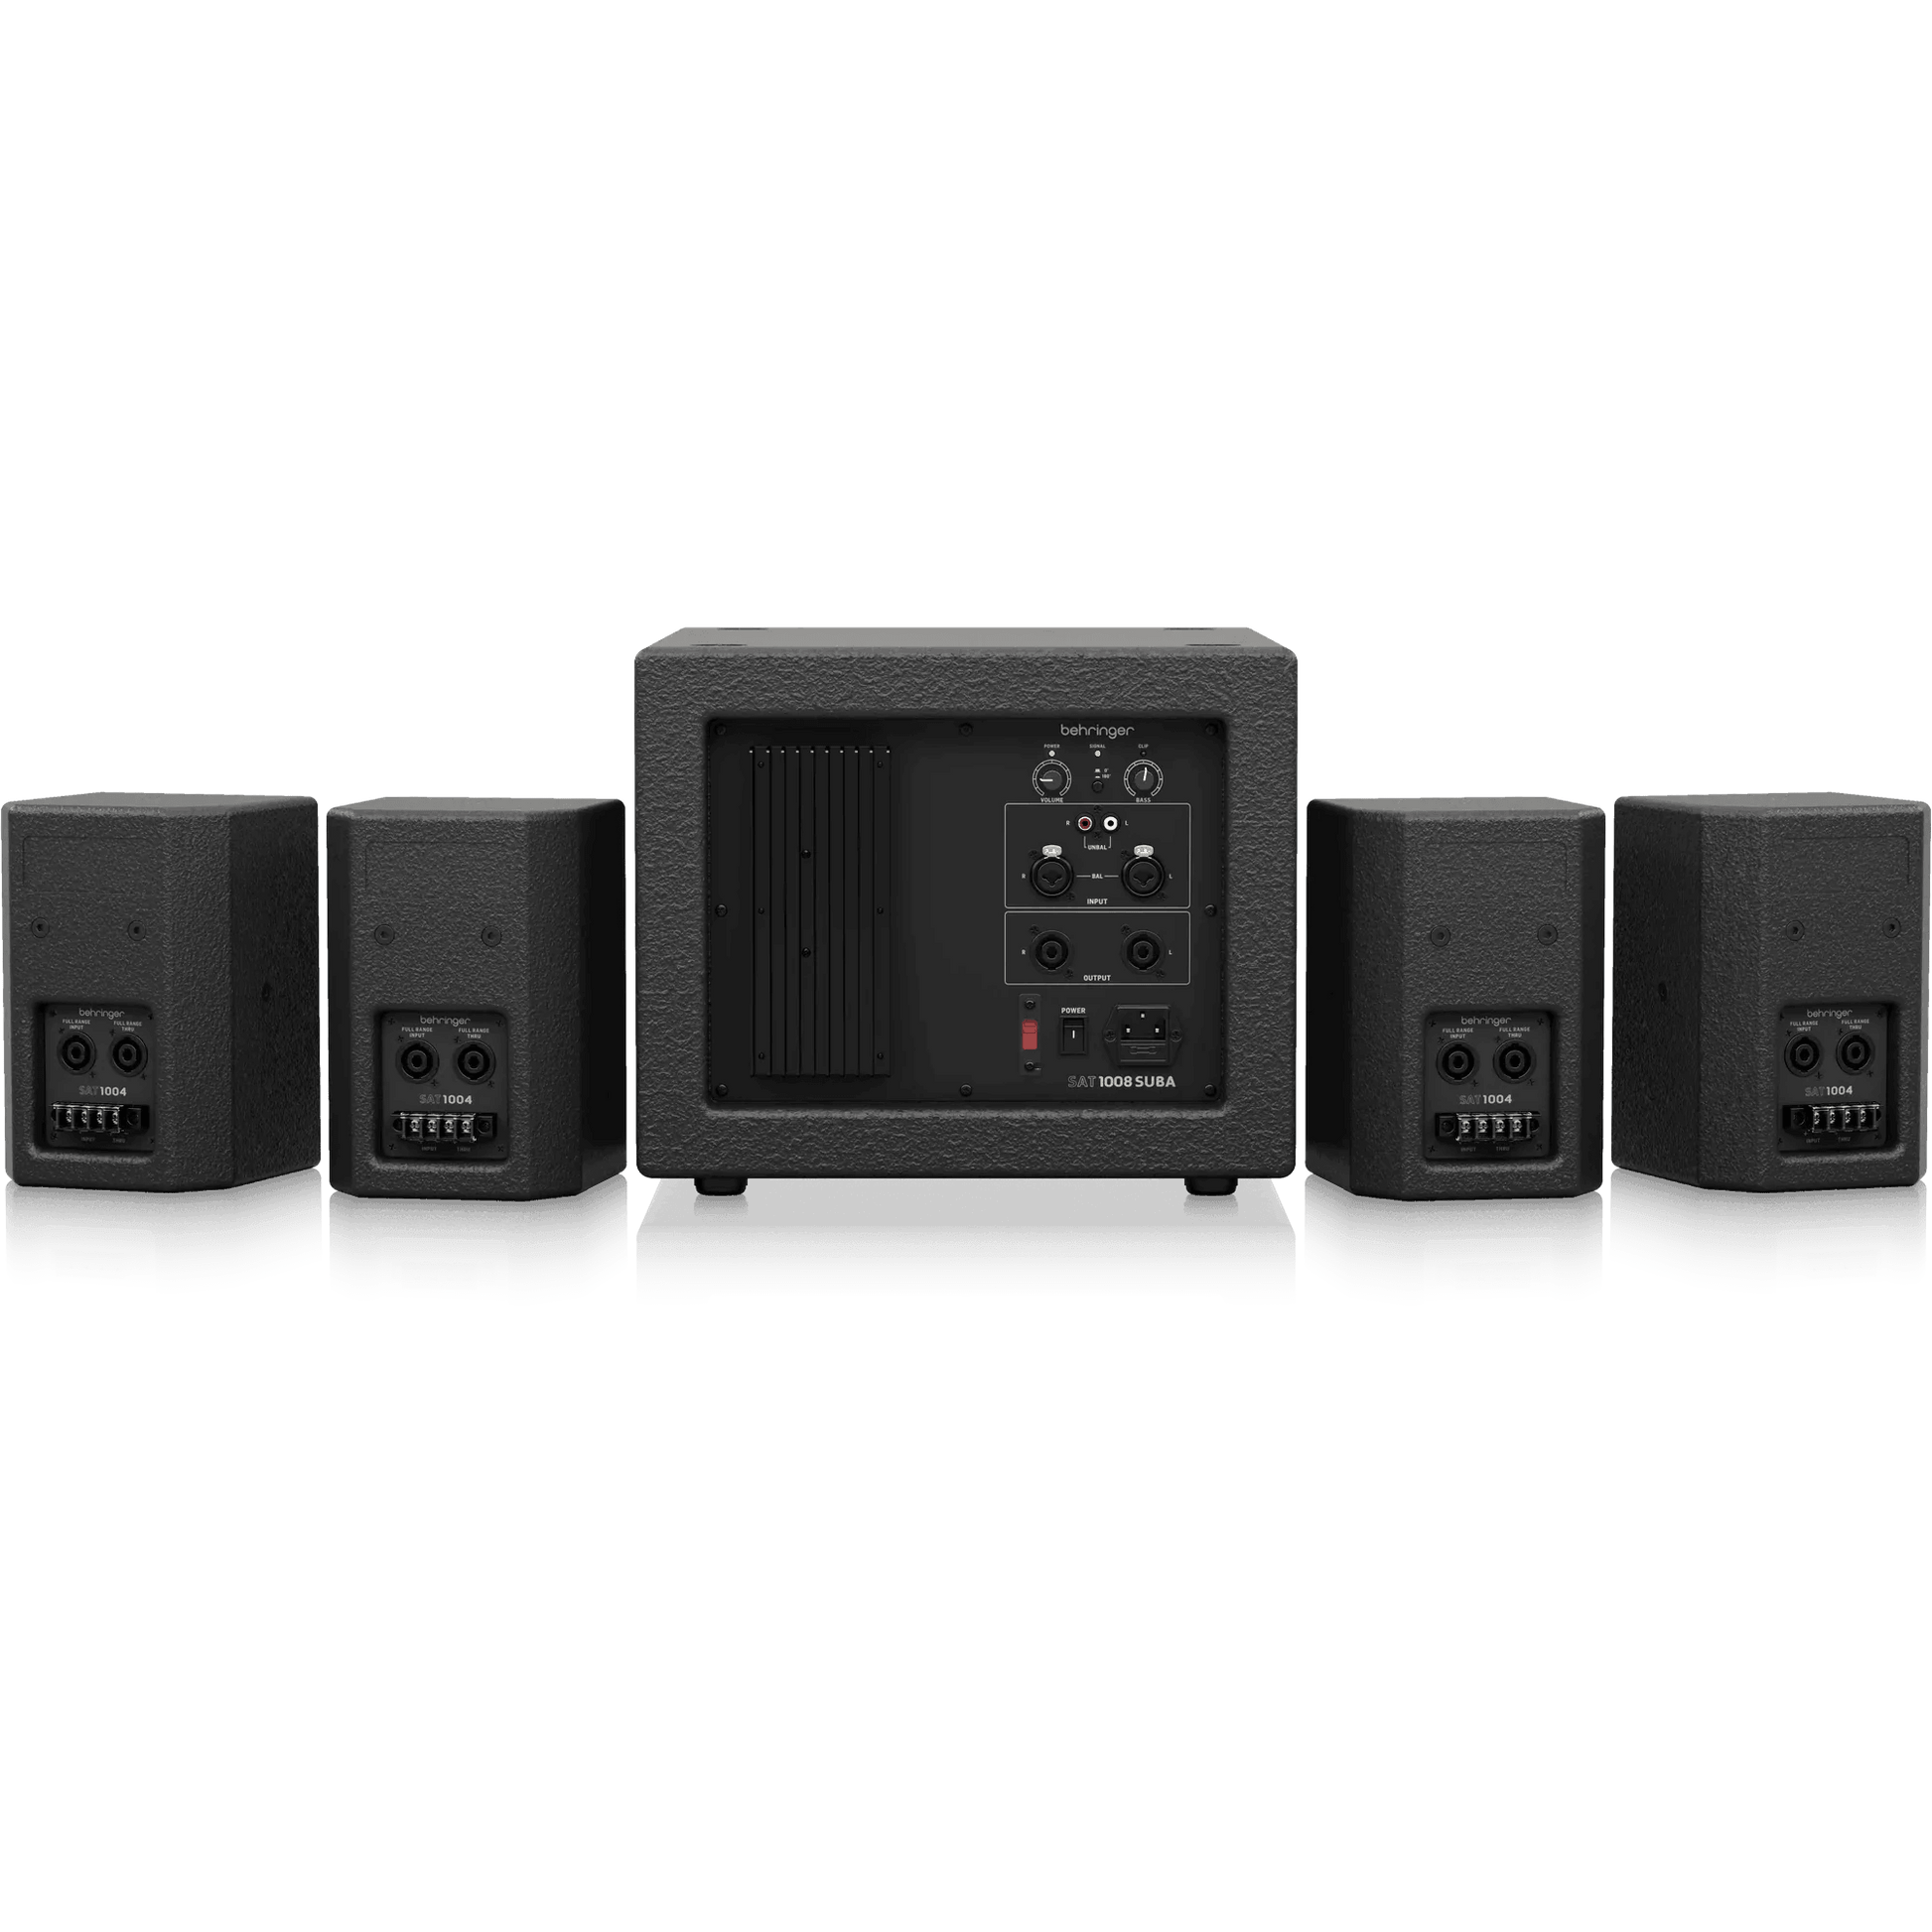 Behringer SAT1004 600W Bundle 4 X 4" Passive PA Speakers and 1 x 8" Active PA Subwoofer